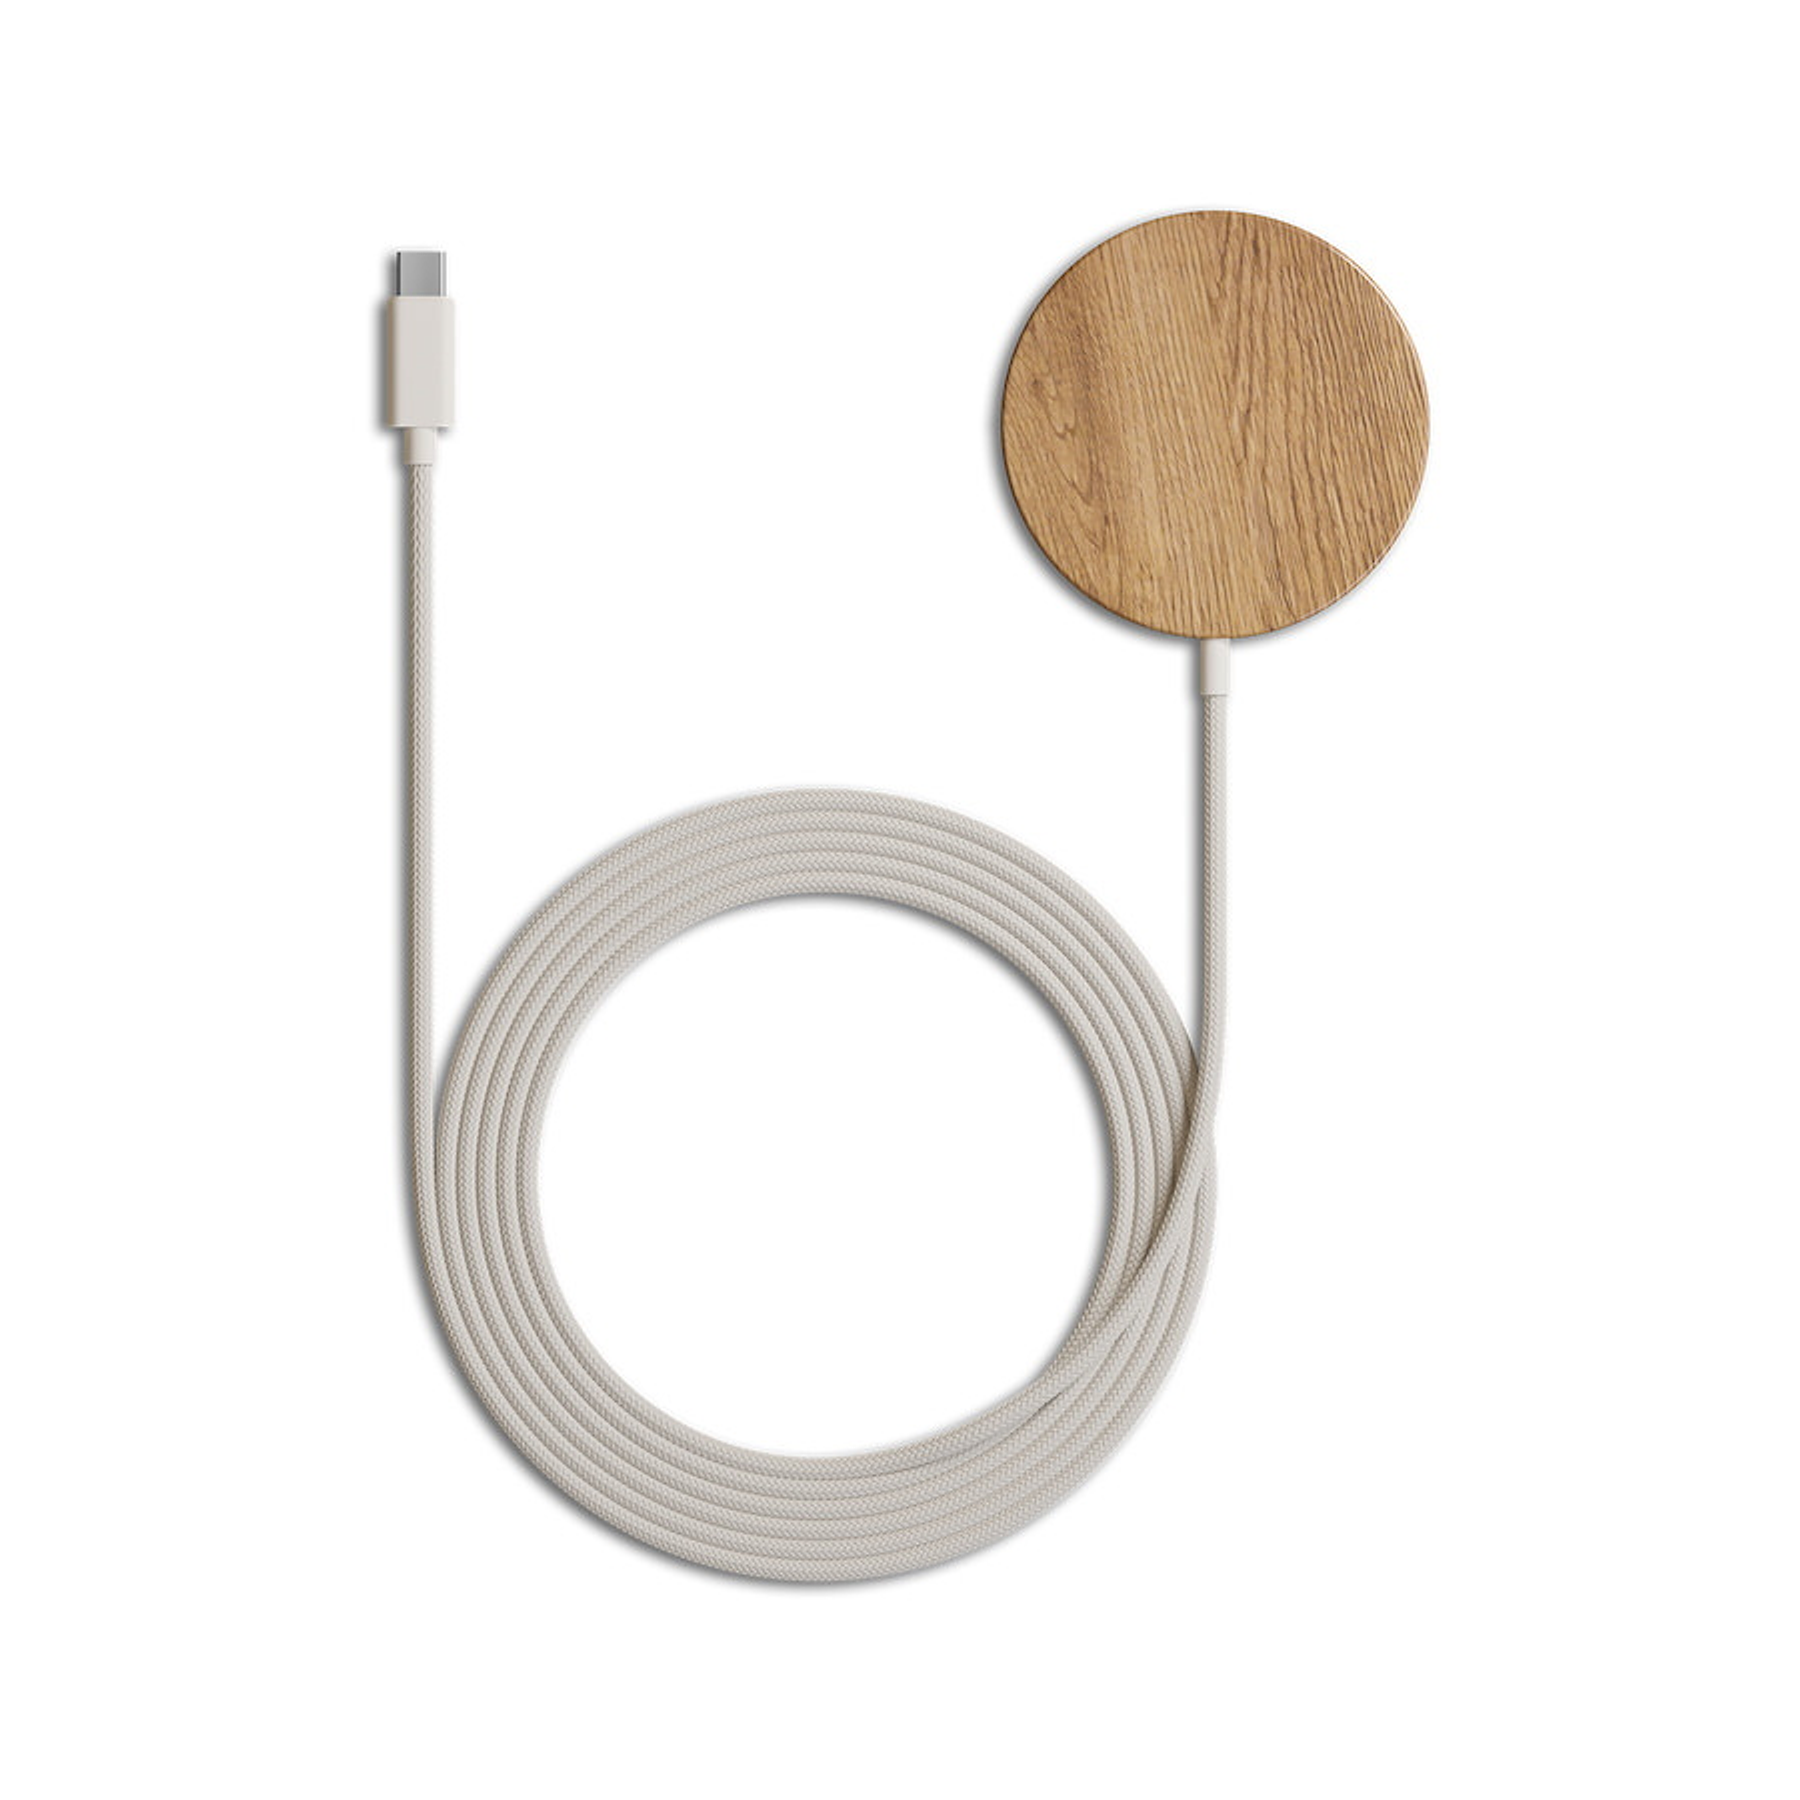 Woodcessories - MagPad Wooden MagSafe Qi charger (oak)